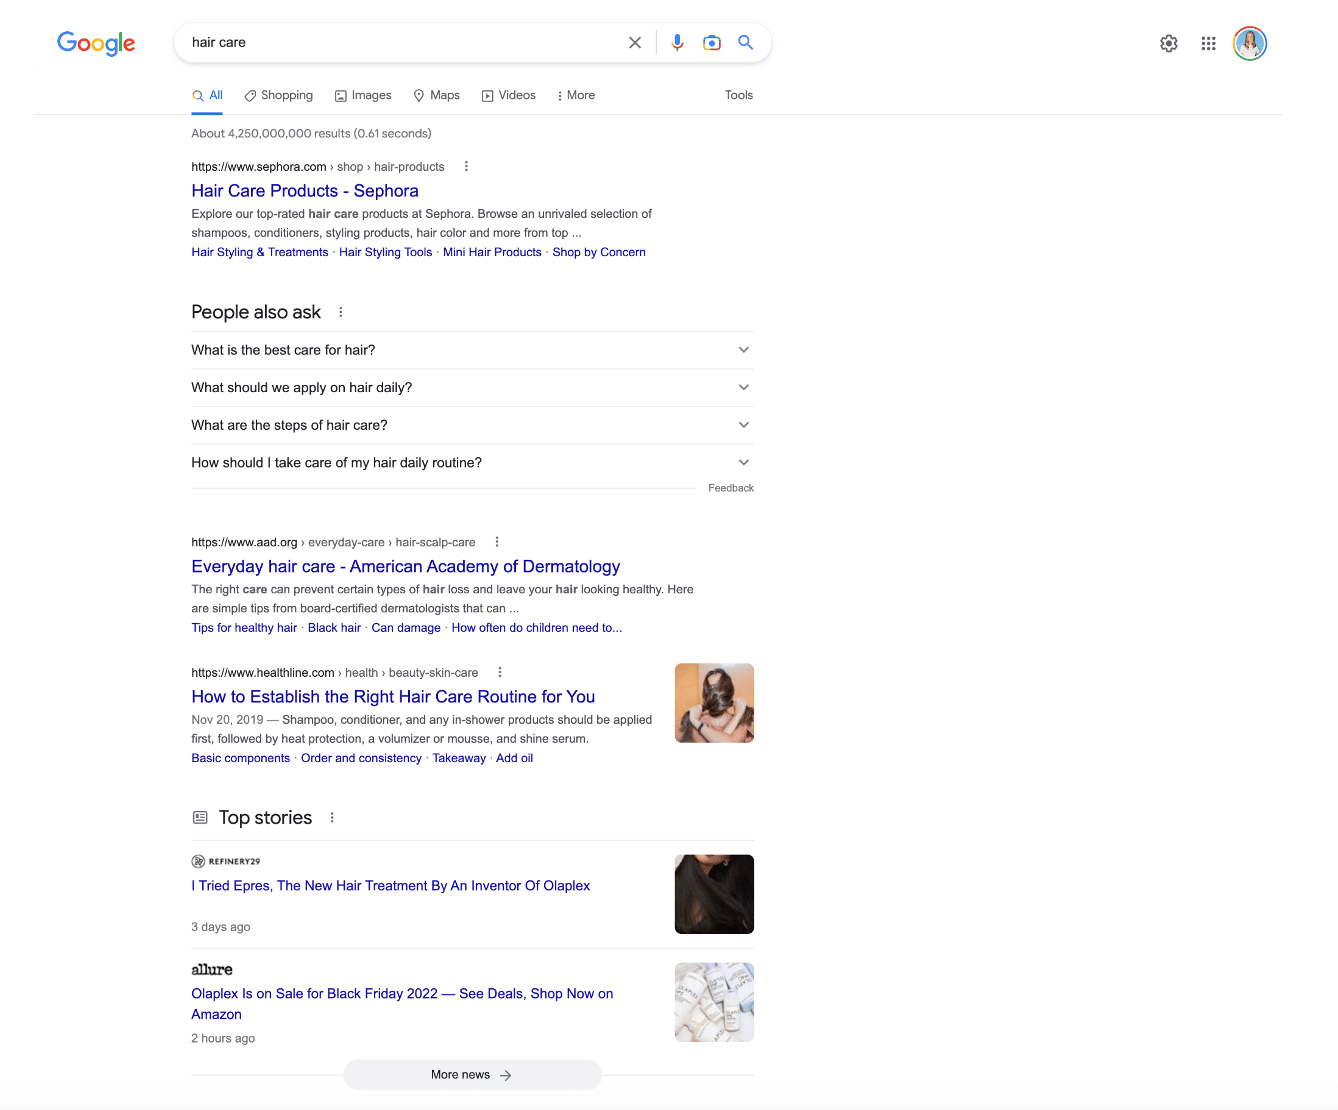 "hair care" results in google SERP